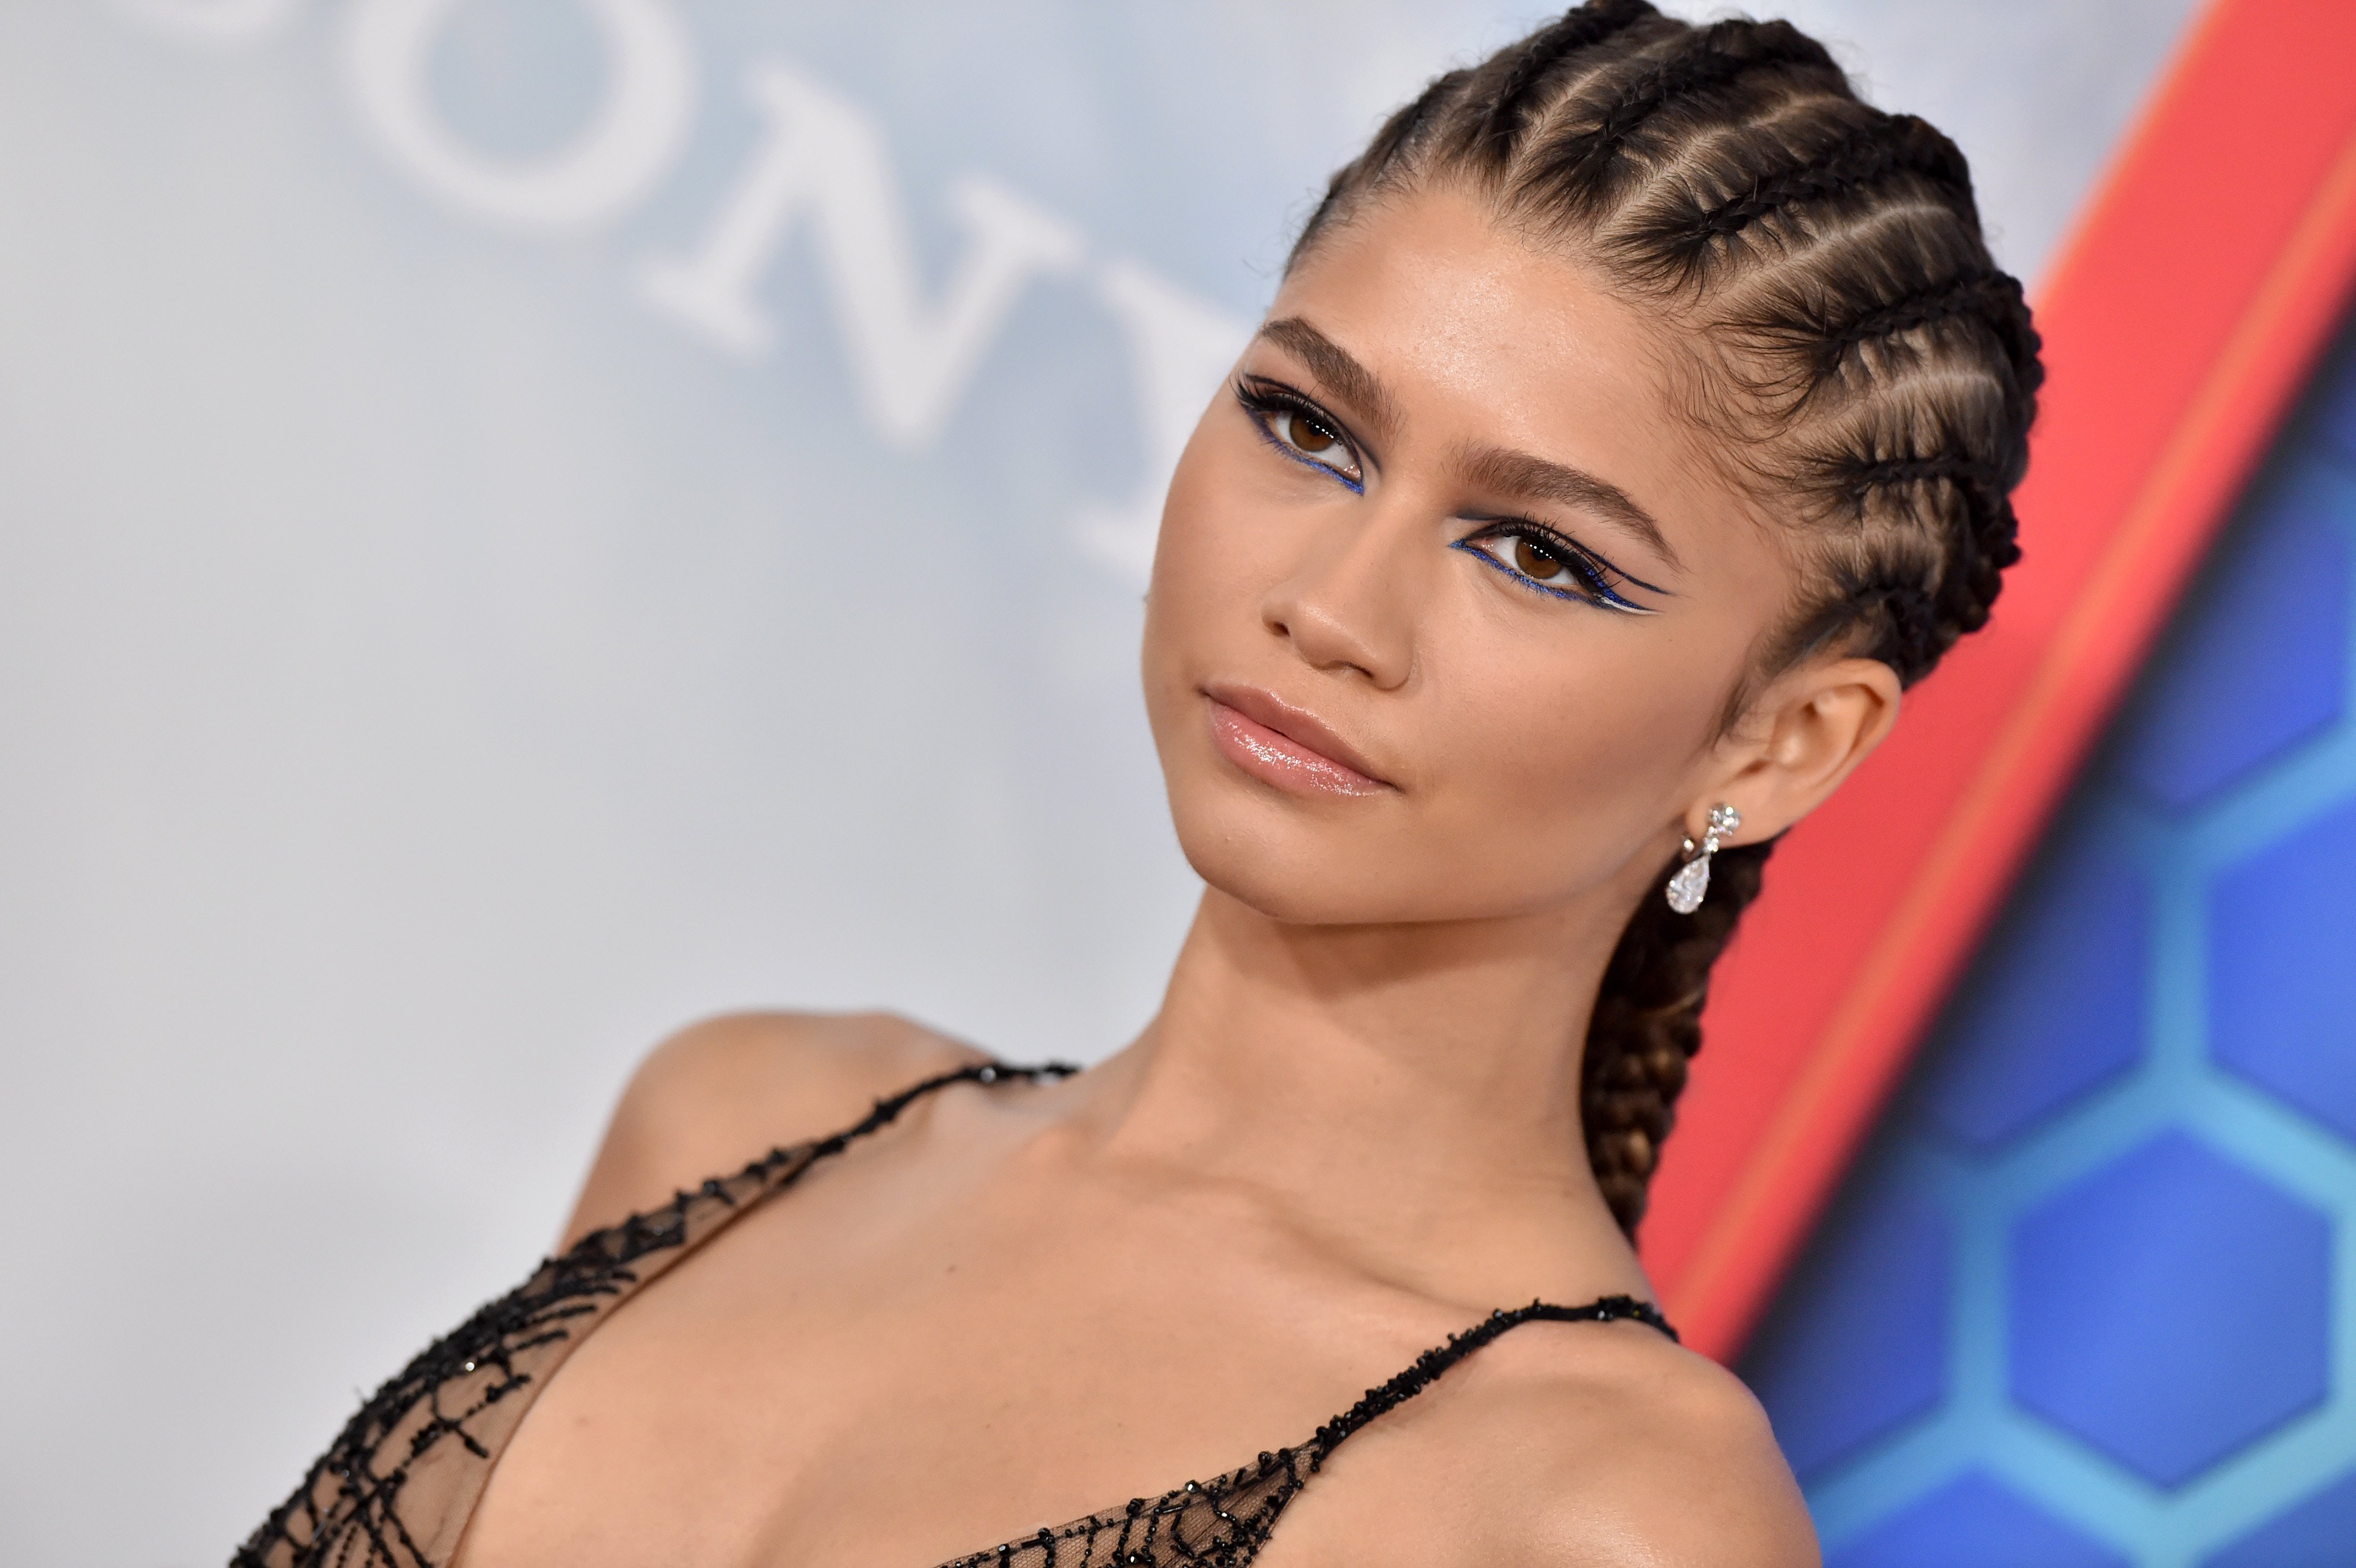 Zendaya attends Sony Pictures' 'Spider-Man: No Way Home' Los Angeles Premiere